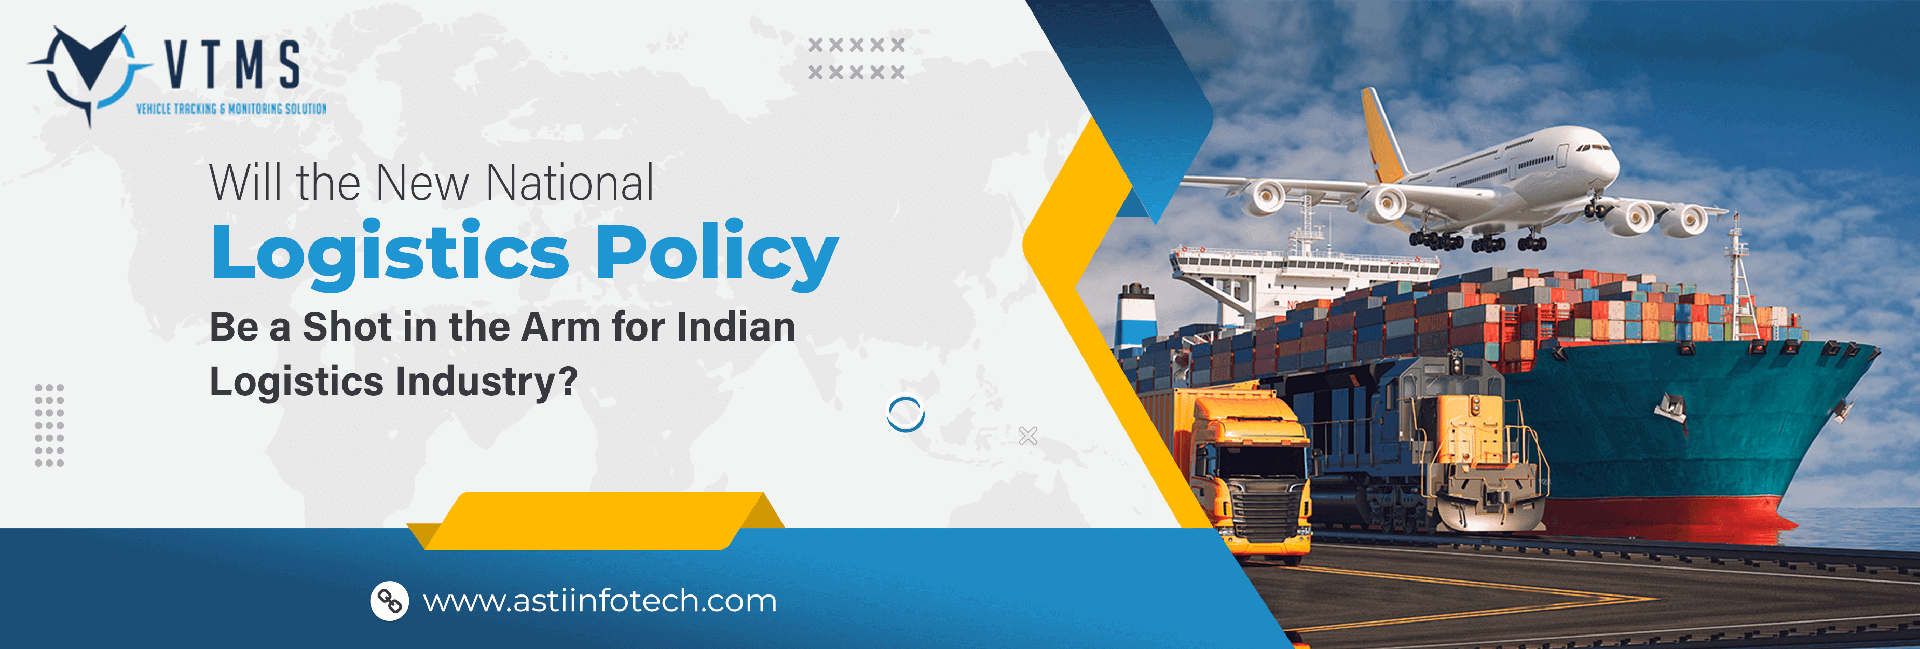 Advancement-of-Indian-Logistics-Industry-with-National-Logistics-Policy